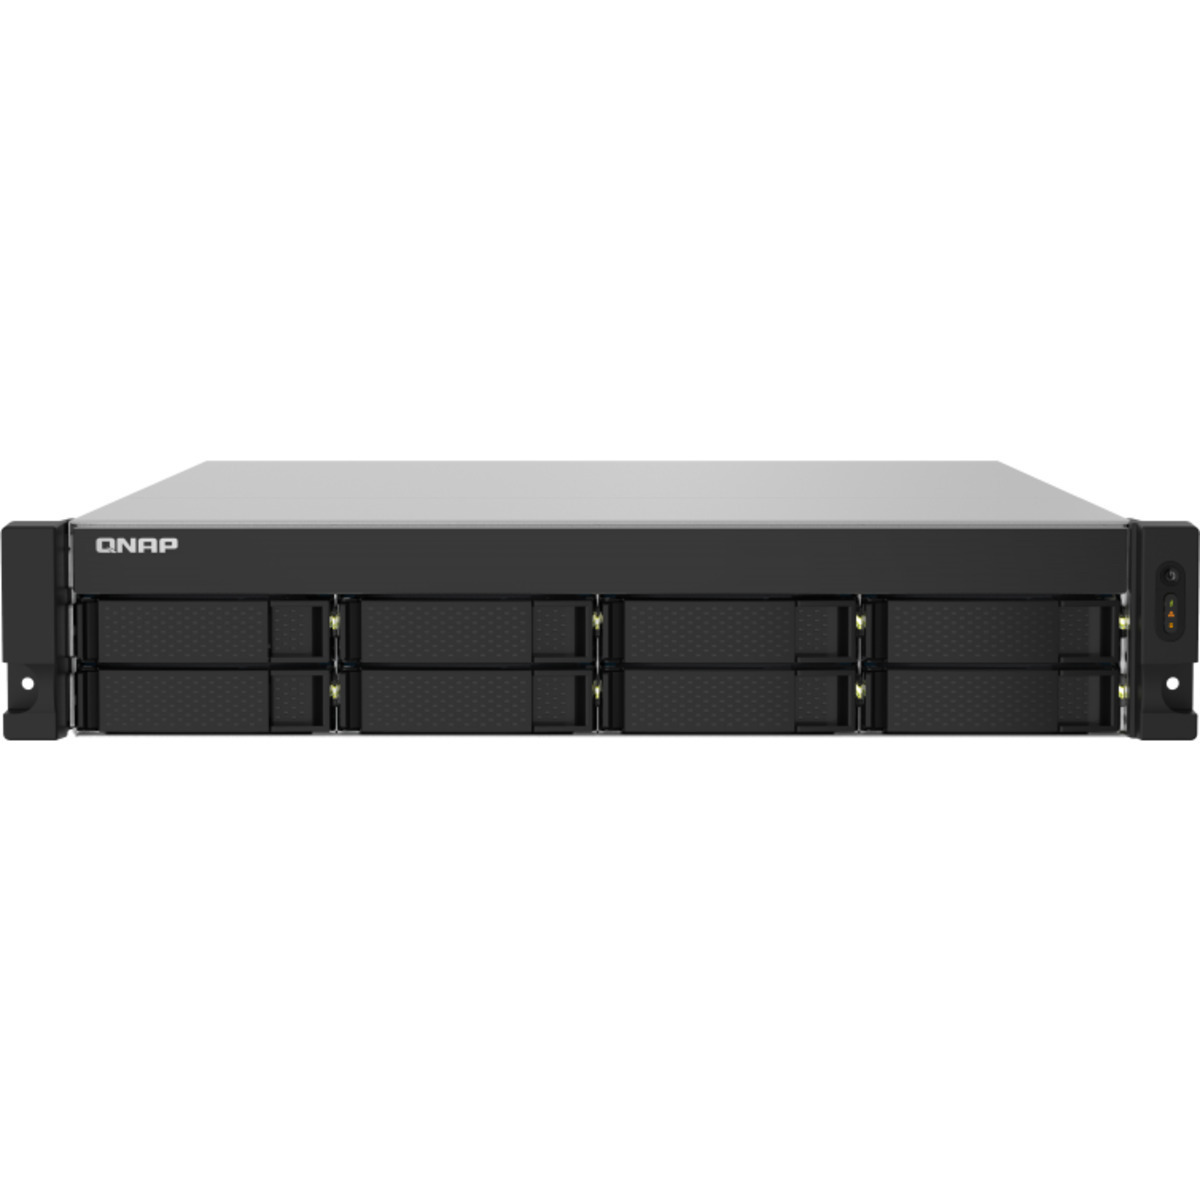 QNAP TS-832PXU 140tb 8-Bay RackMount Personal / Basic Home / Small Office NAS - Network Attached Storage Device 7x20tb Western Digital Red Pro WD201KFGX 3.5 7200rpm SATA 6Gb/s HDD NAS Class Drives Installed - Burn-In Tested - FREE RAM UPGRADE TS-832PXU